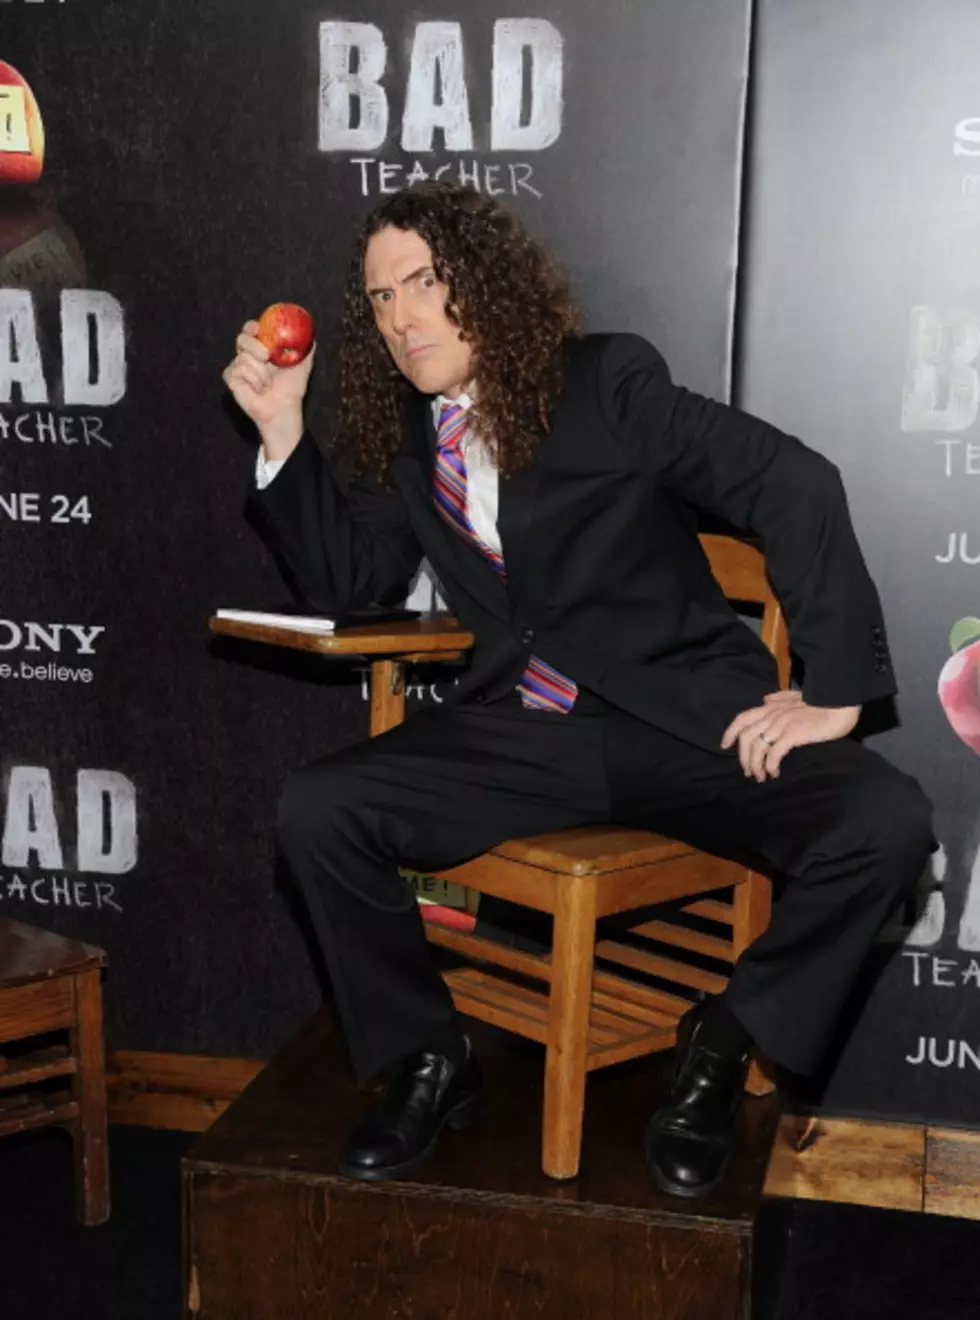 Weird Al Sues Sony, Shannon Tweed Gets Even With Groupies and Gene Simmons, Cocaine Found In Whitney’s Hotel.